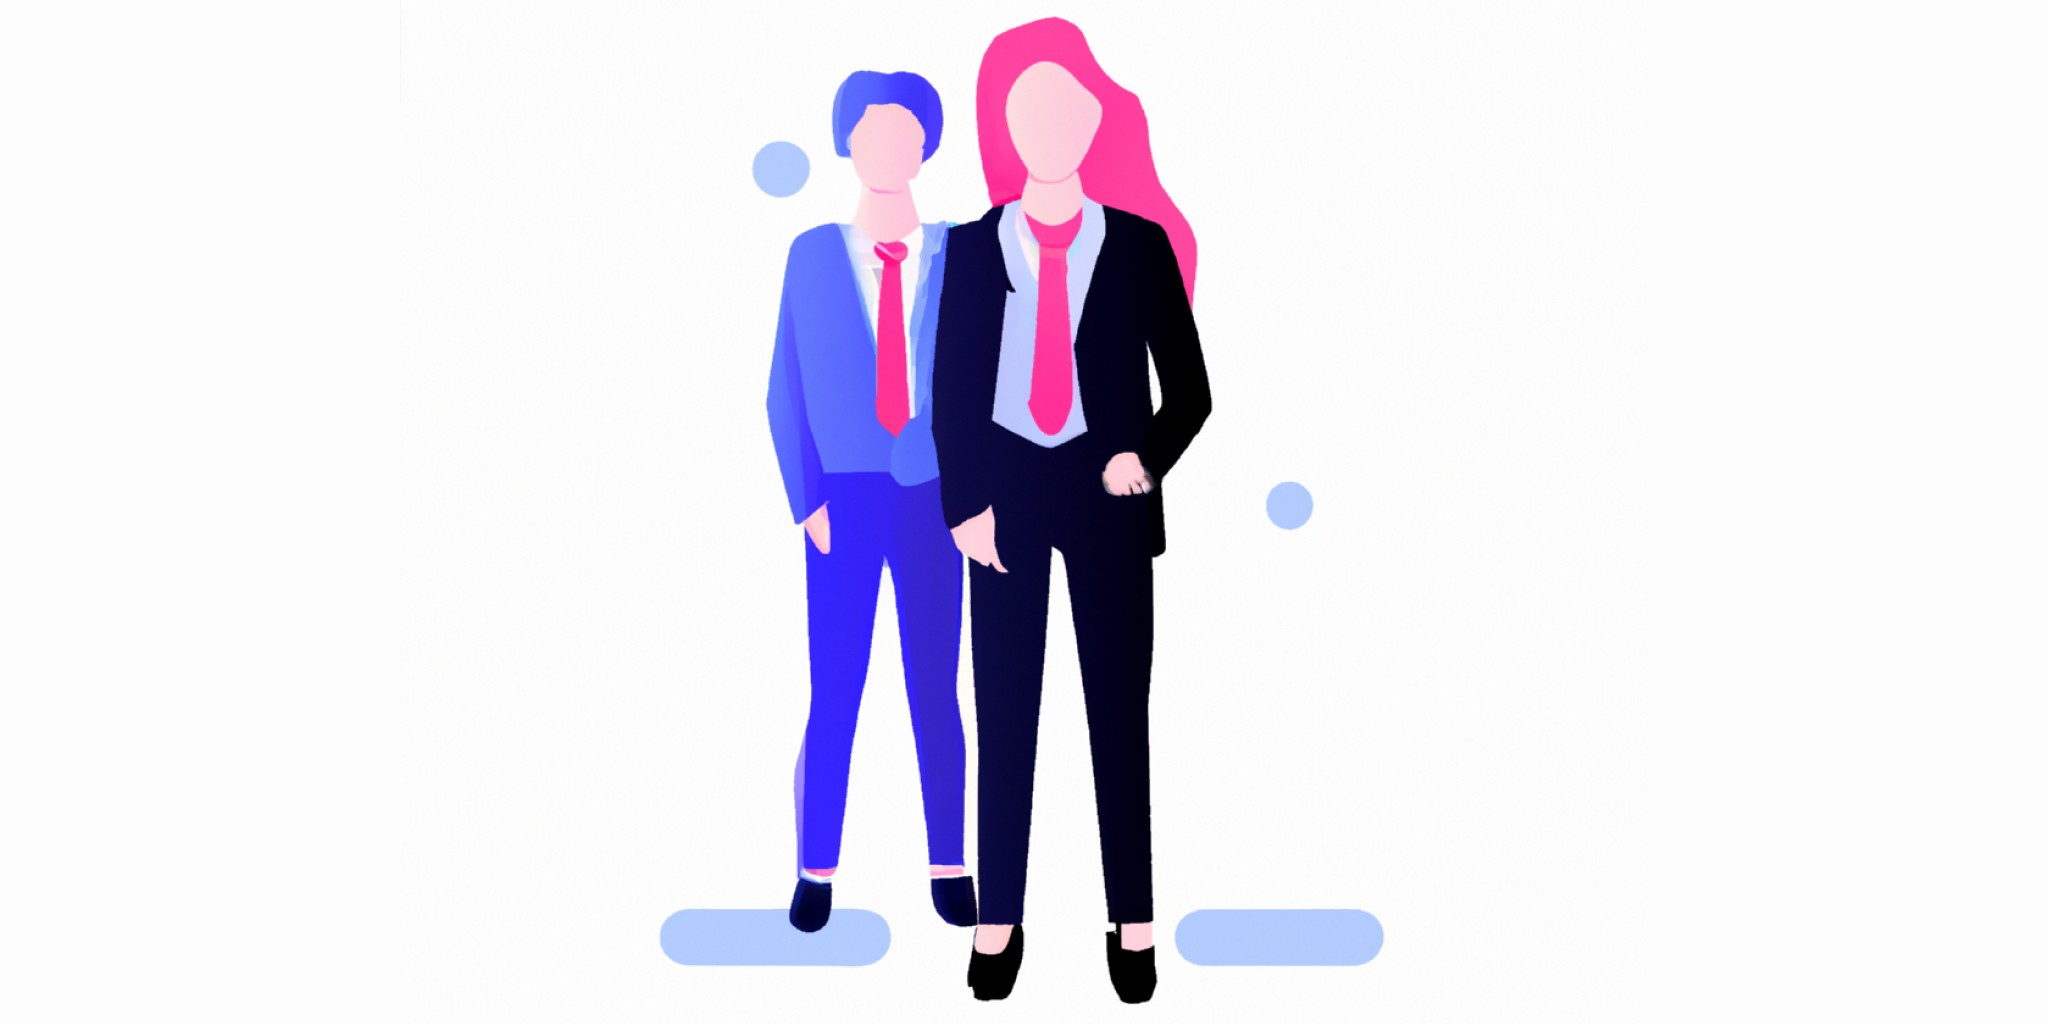 one person in a suit and one person in a t-shirt in flat illustration style with gradients and white background